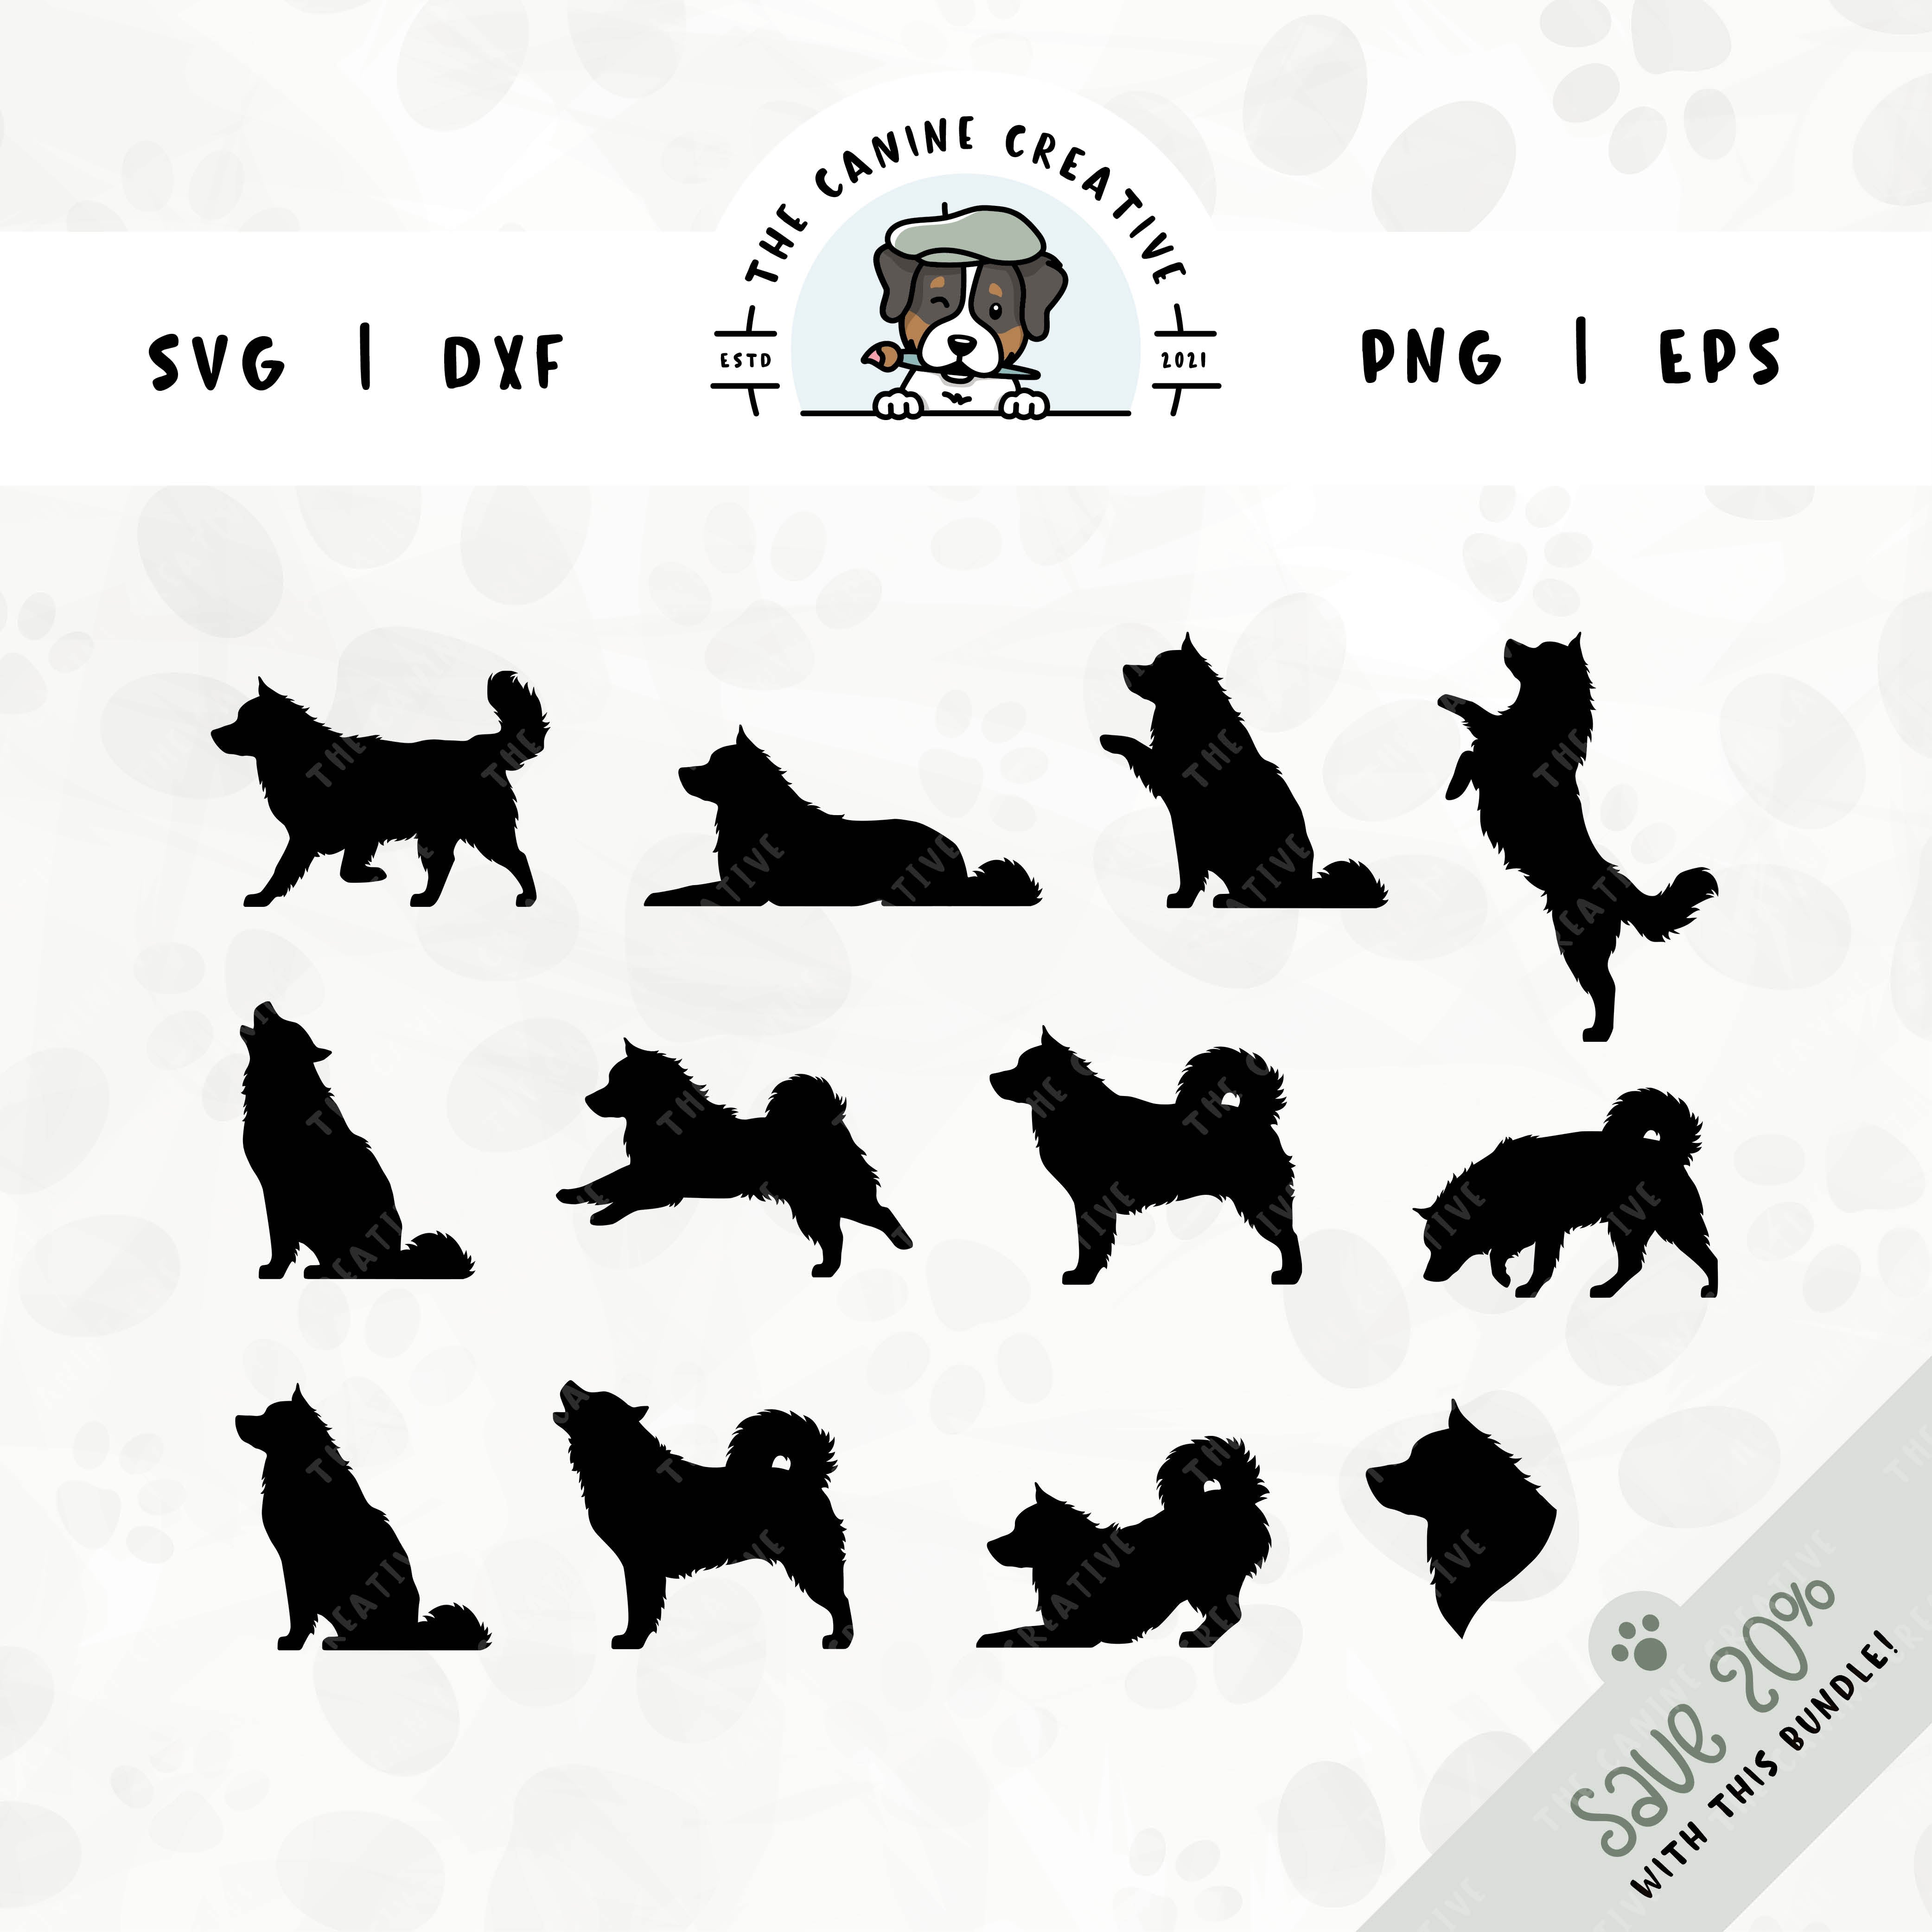 This 12-pack Alaskan Malamute silhouette bundle features a dog's head in profile, along with various poses including running, laying down, playing, standing, sitting, walking, jumping up, sniffing, barking, howling, and shaking a paw. File formats include: SVG, DXF, PNG, and EPS.